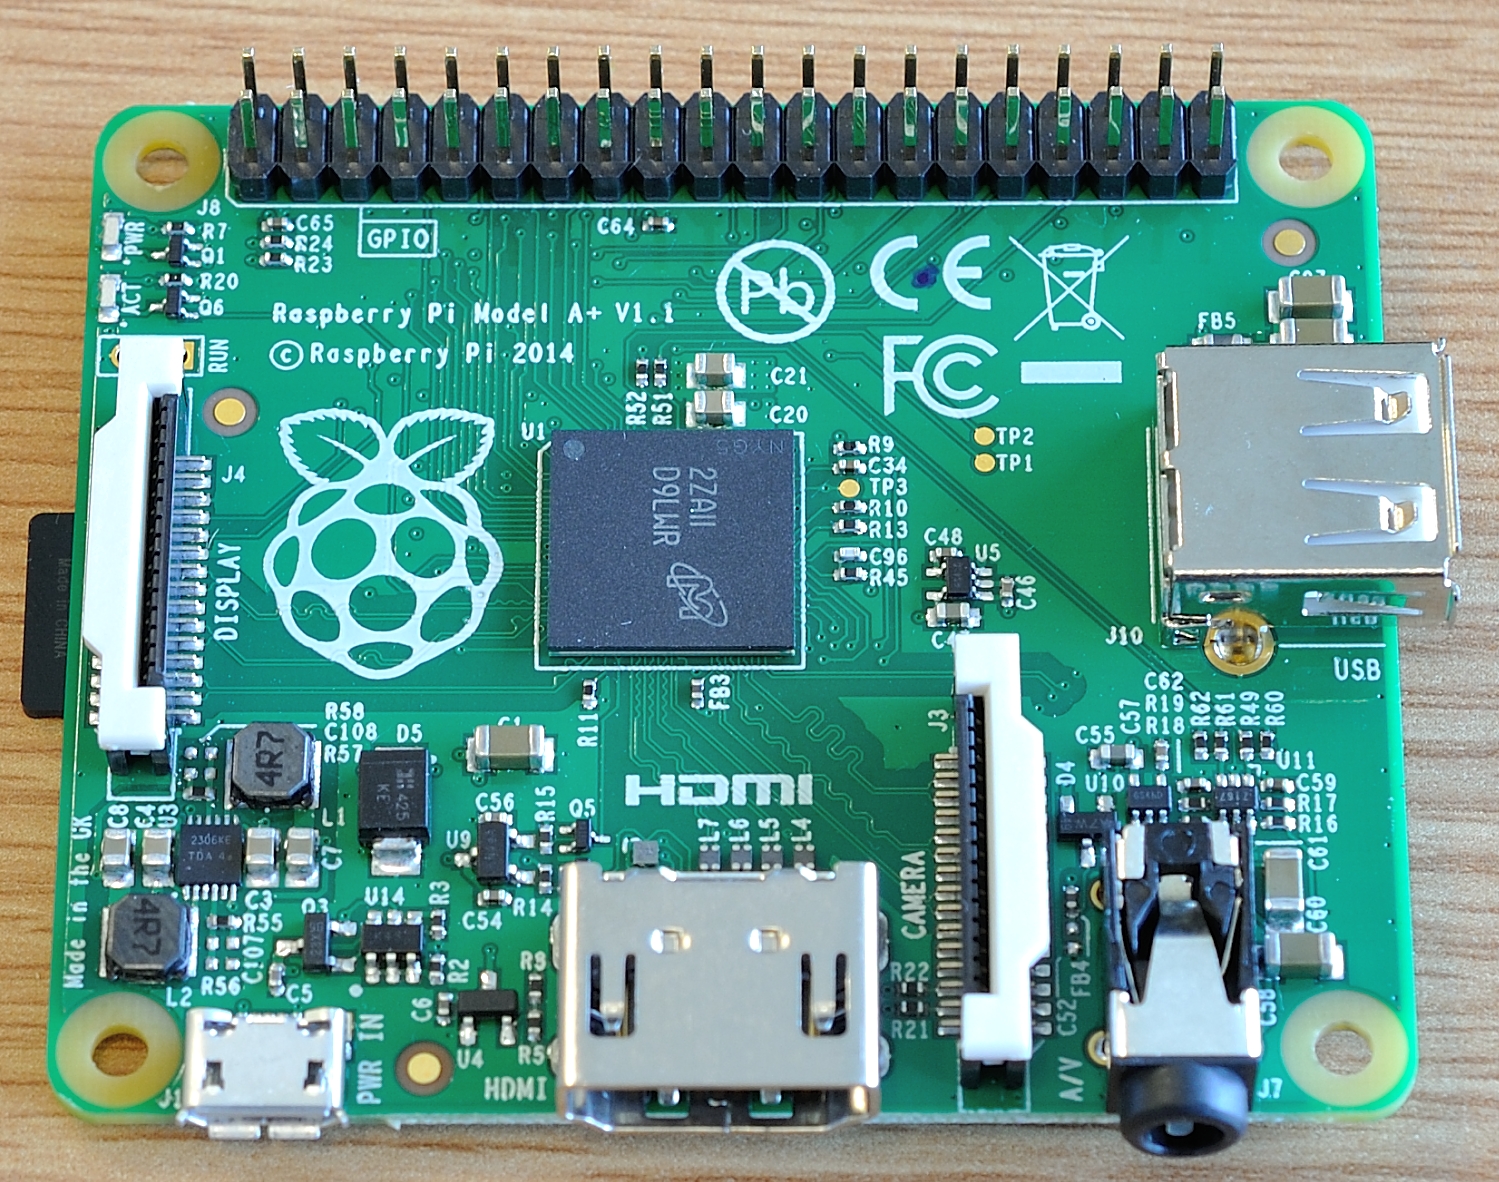 raspberry-pi-model-a-launched-today-raspi-tv